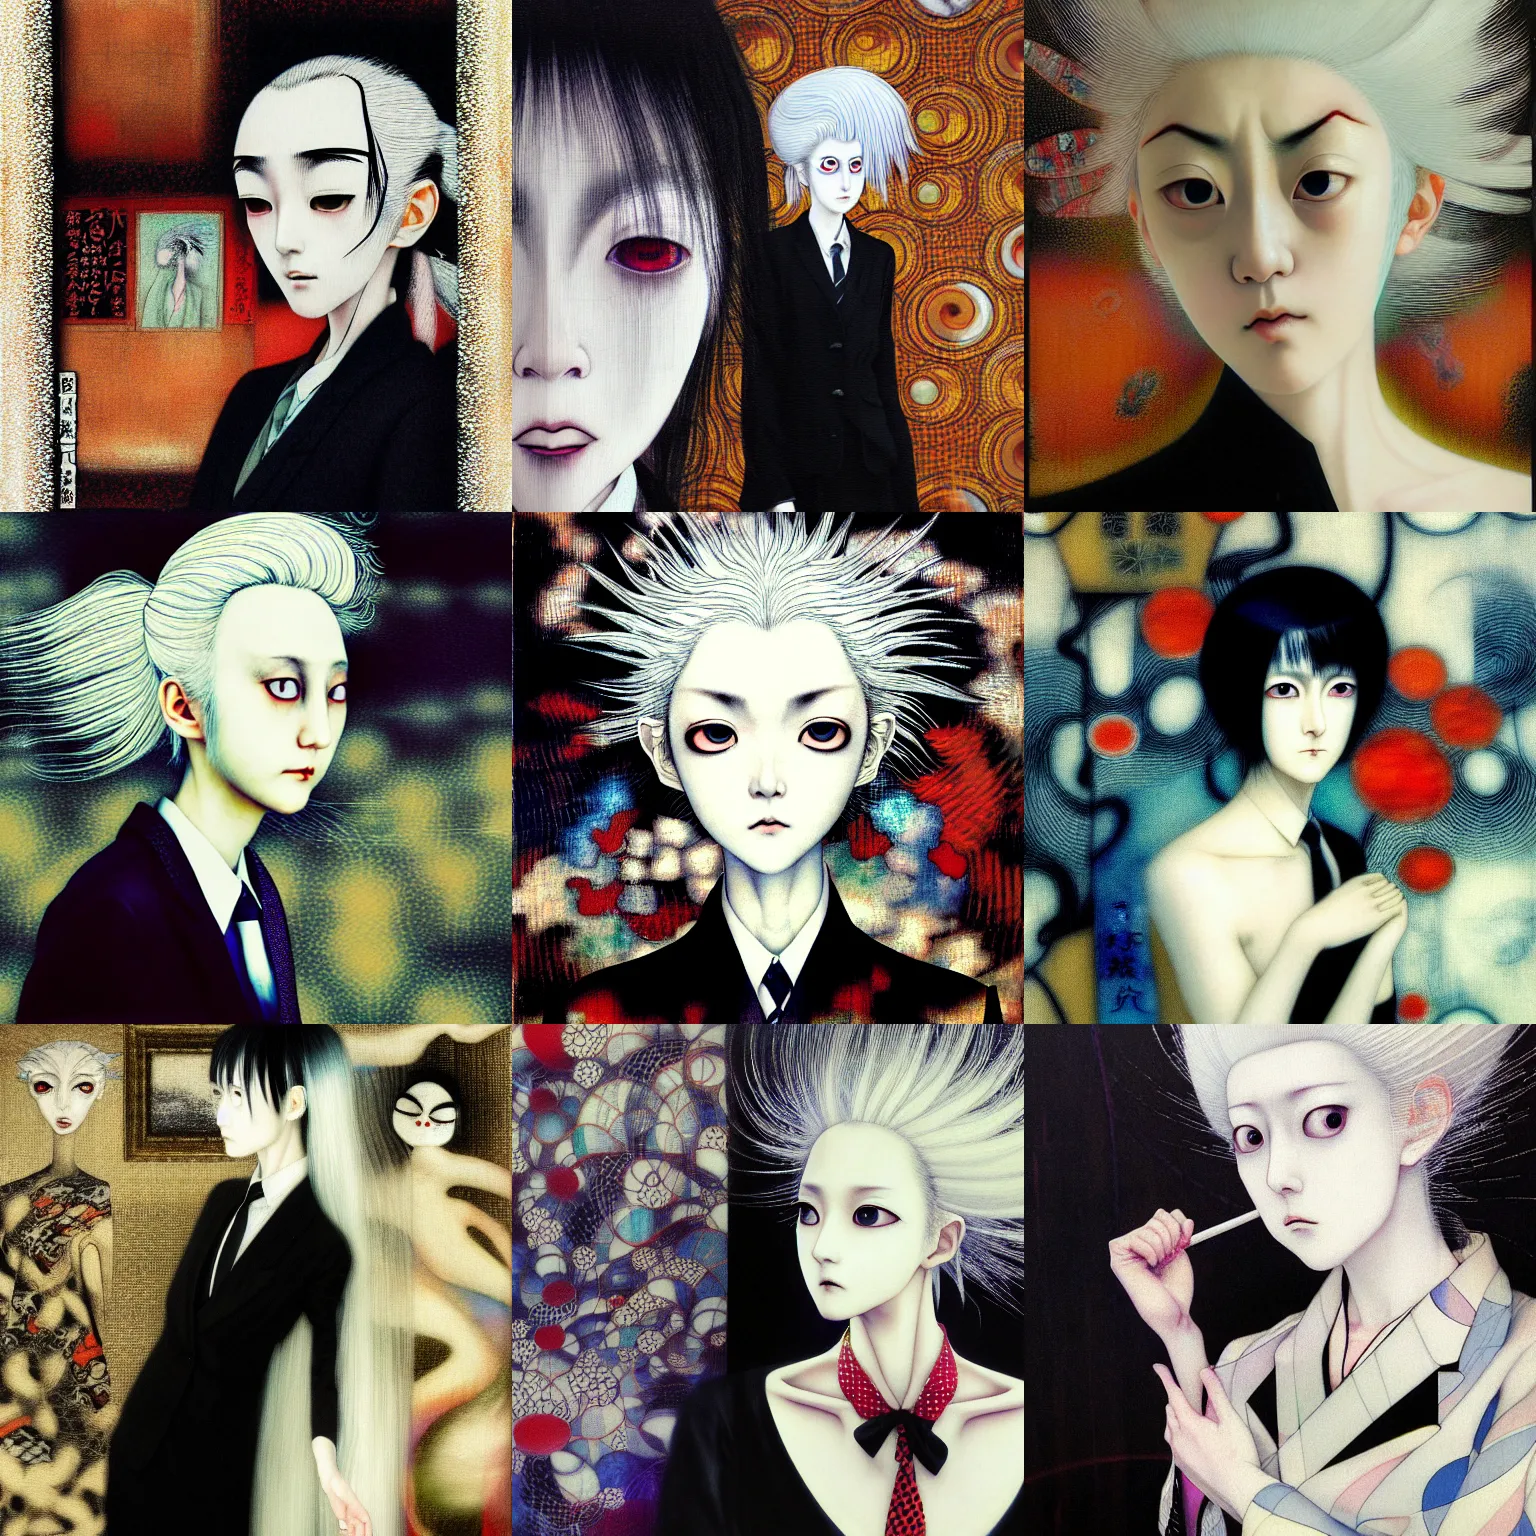 Prompt: yoshitaka amano blurred and dreamy realistic portrait of a woman with white hair and black eyes wearing dress suit with tie, junji ito abstract patterns in the background, satoshi kon anime, noisy film grain effect, highly detailed, renaissance oil painting, weird portrait angle, blurred lost edges, three quarter view